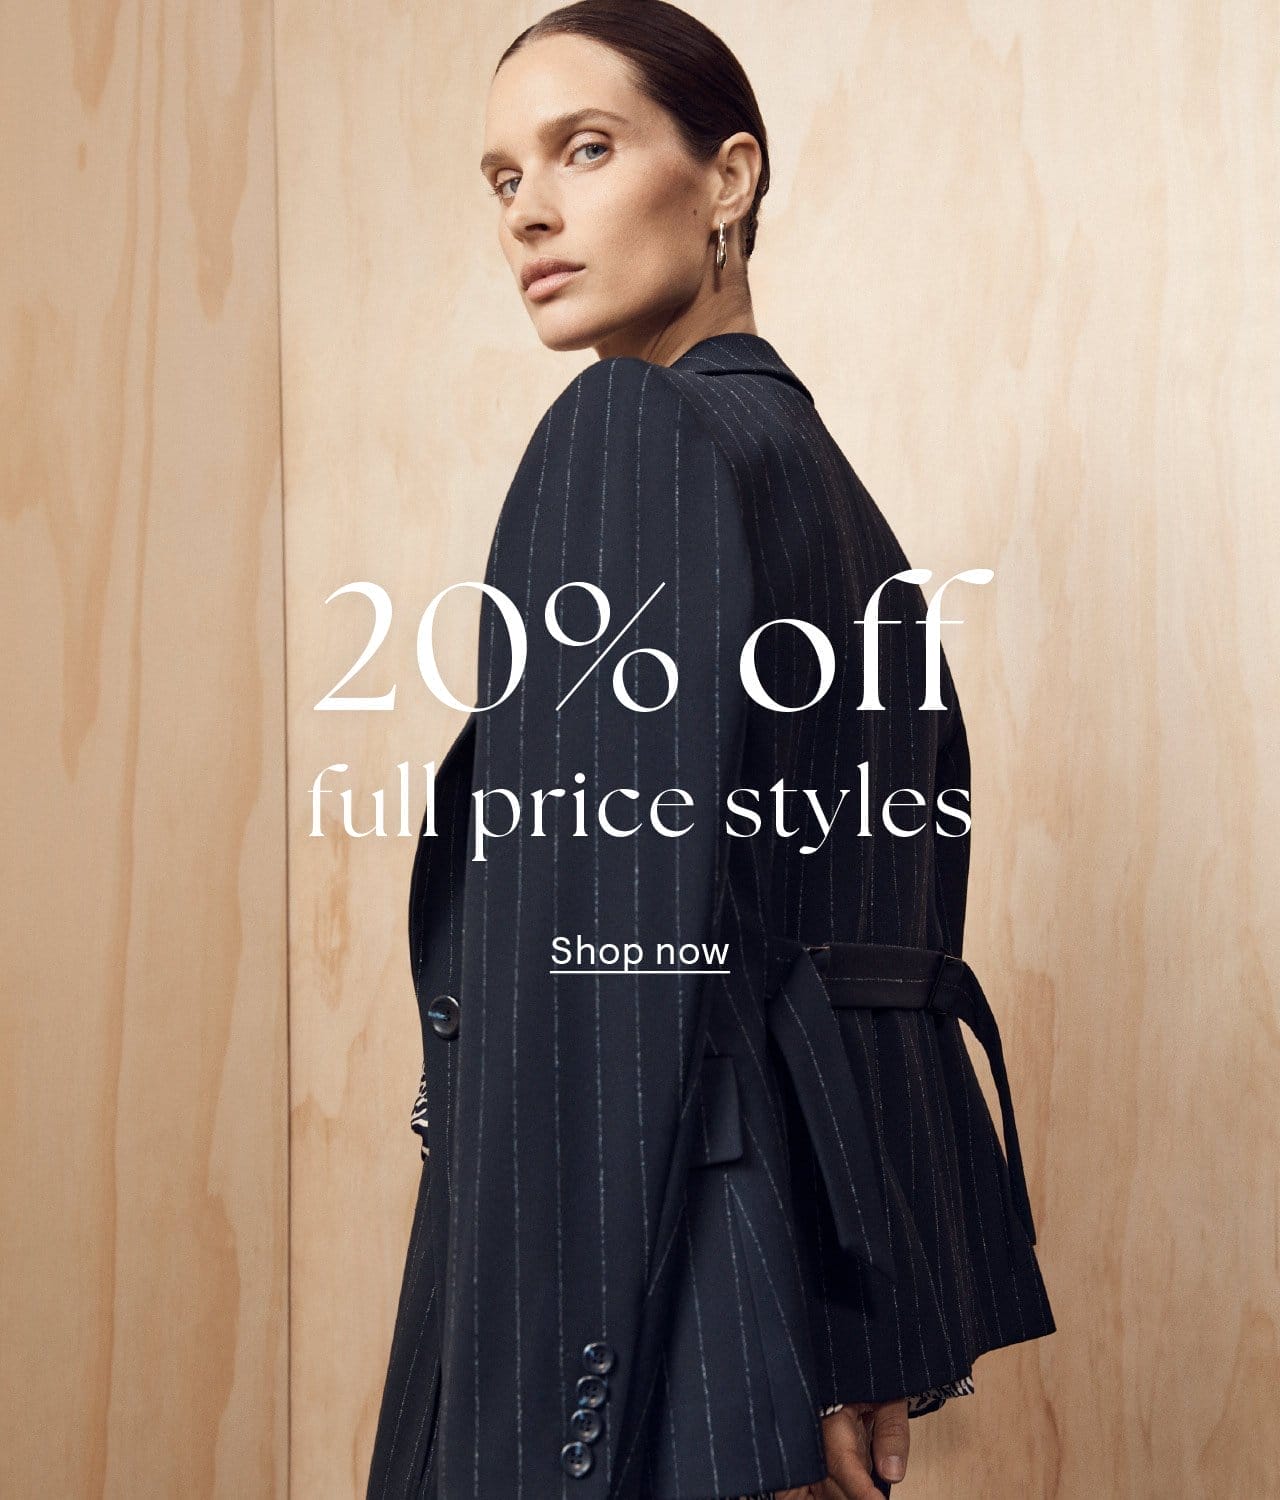 20% off full price styles. Shop now.